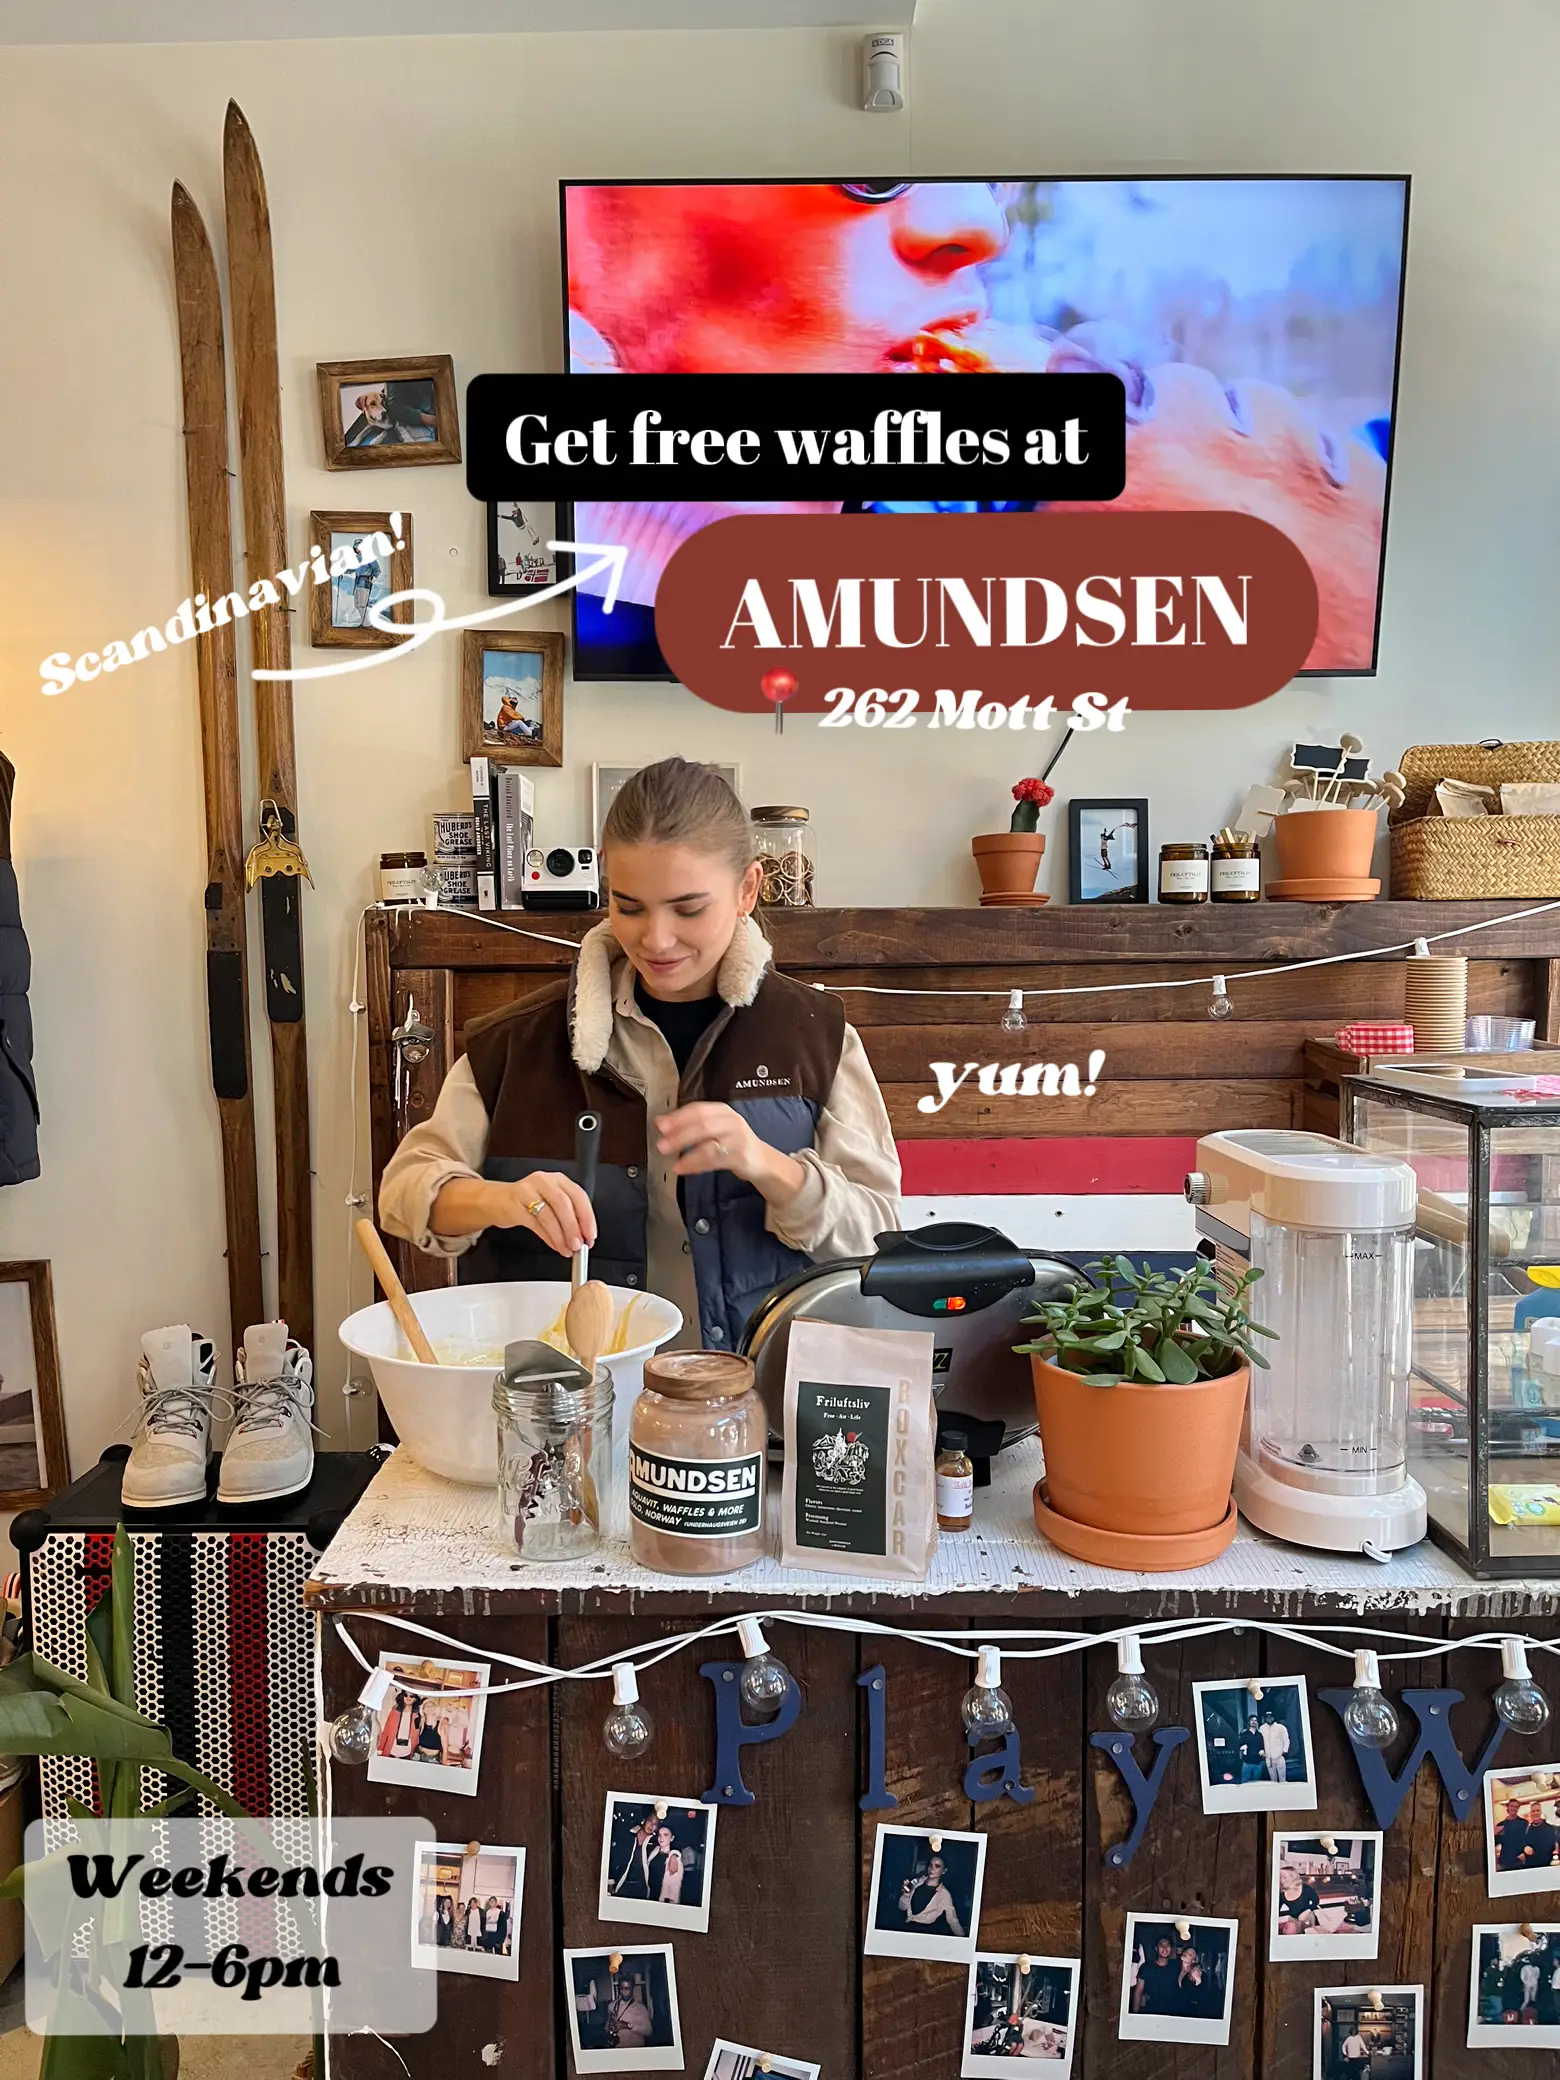  A woman is standing behind a counter at Scandinay AMUNDSEN, making waffles.